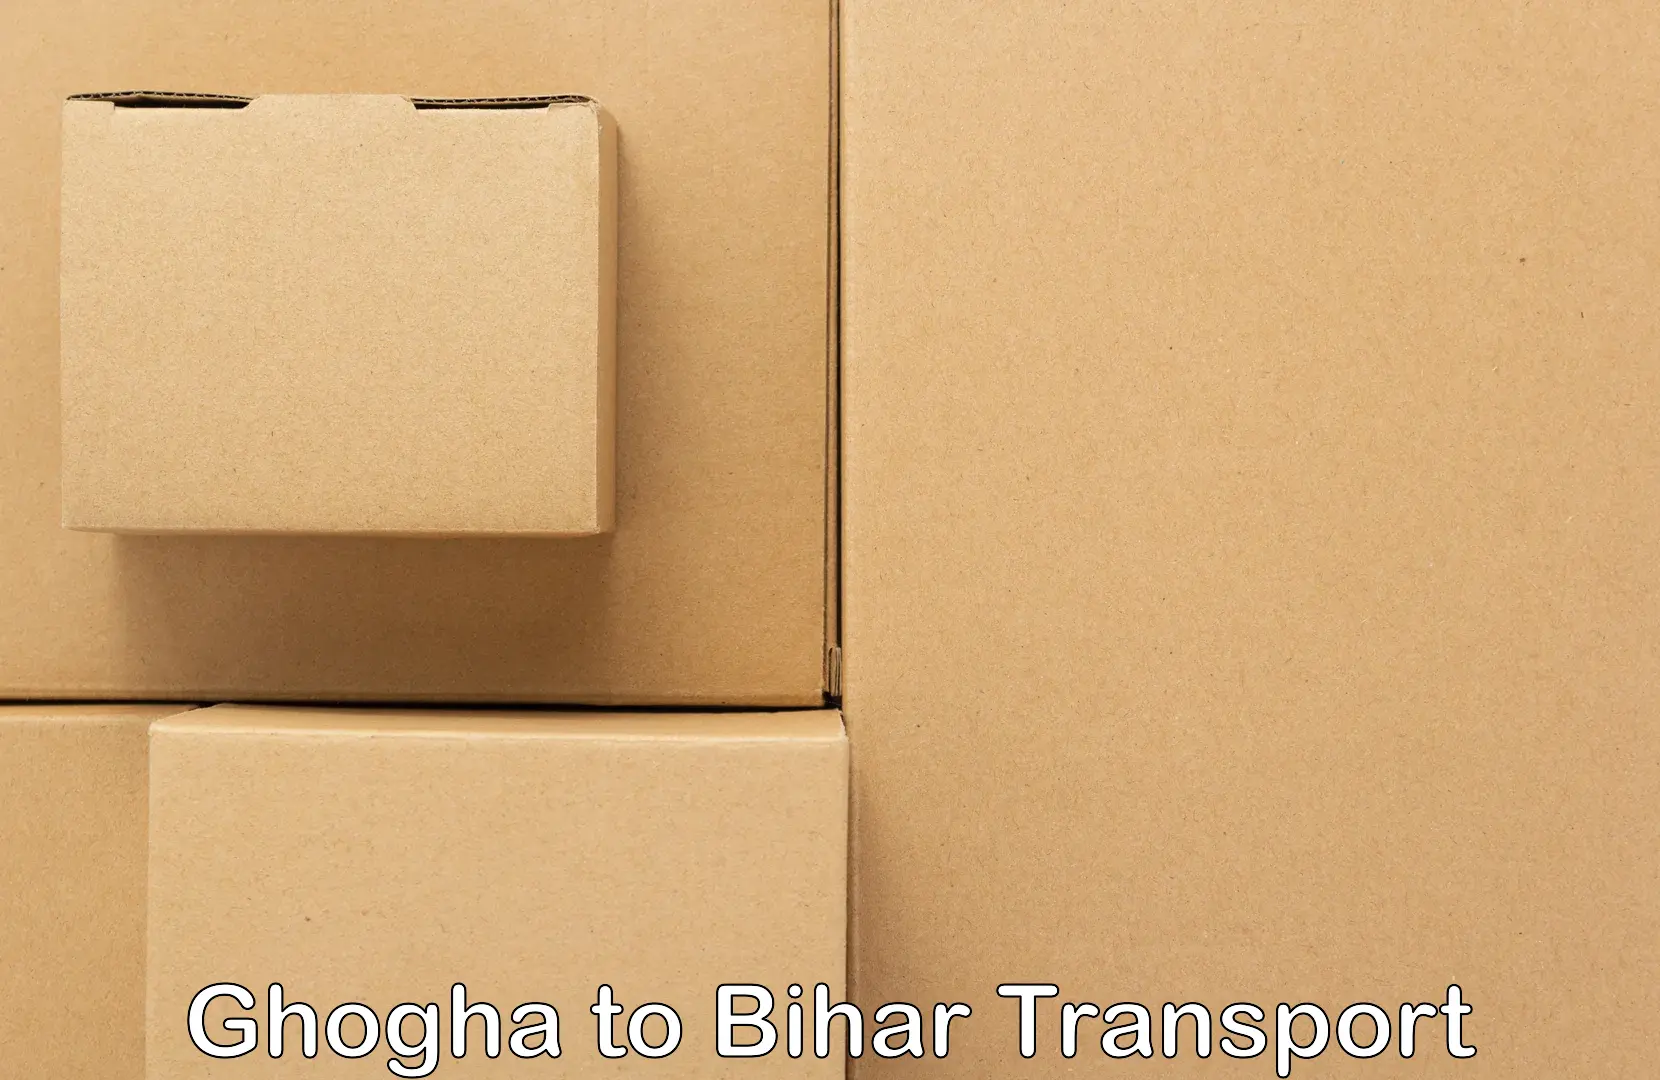 Air freight transport services Ghogha to Patna